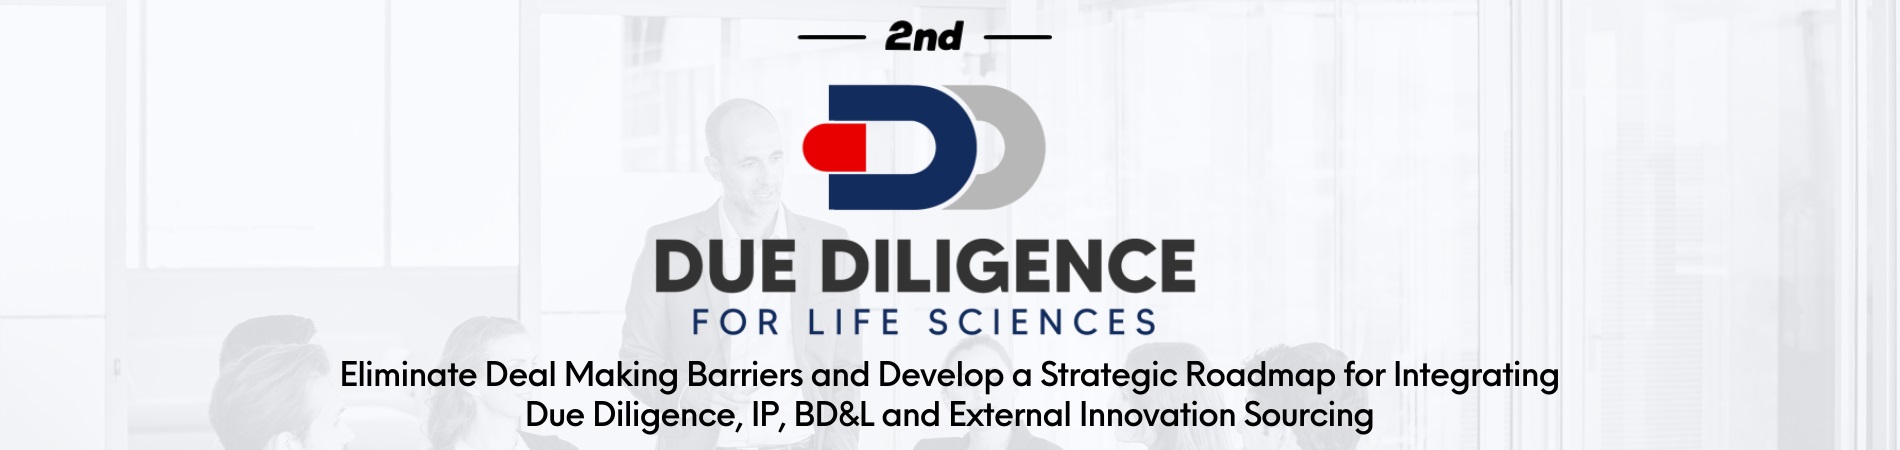 2nd Due Diligence for Life Sciences Summit